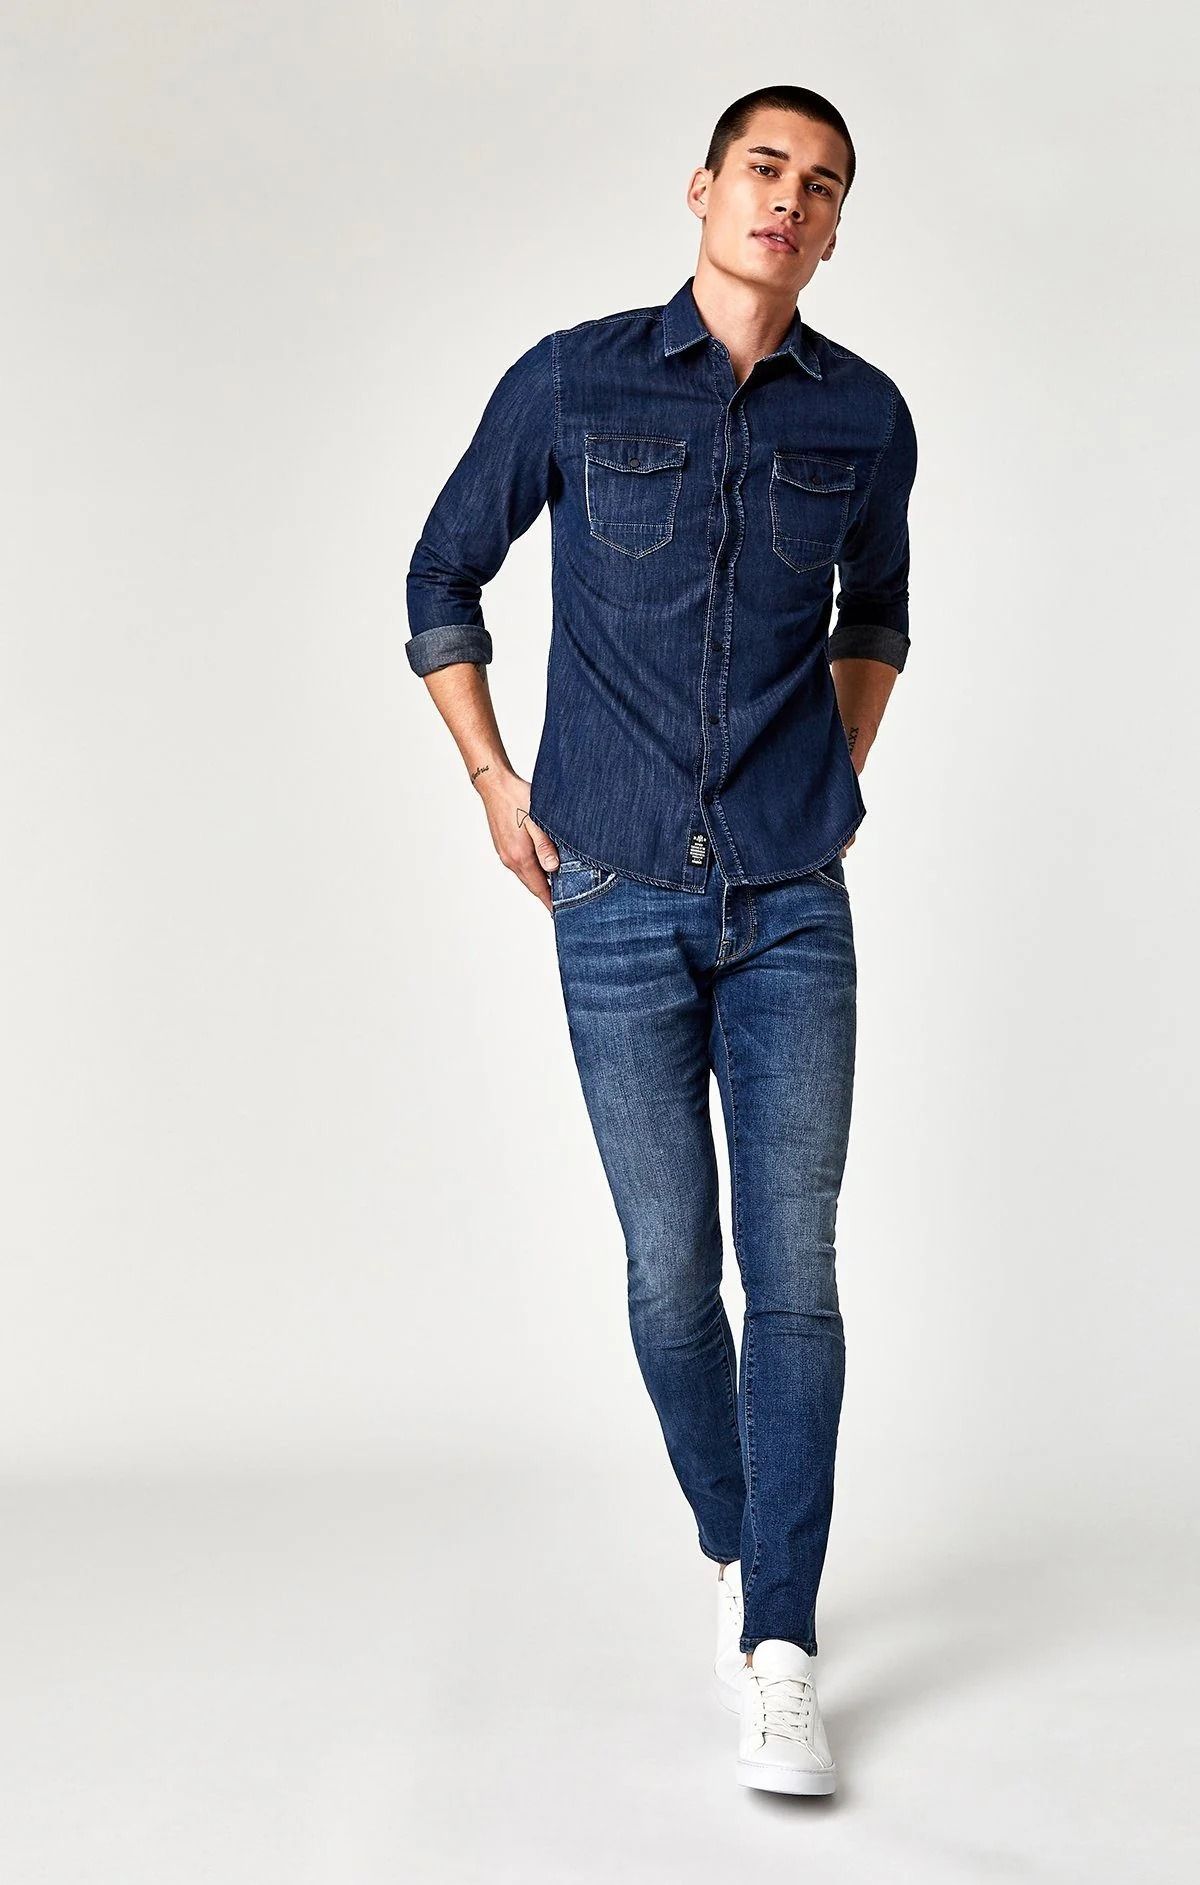 Denim Shirts for Men - Try This 25 Trendy Models For Classy Look